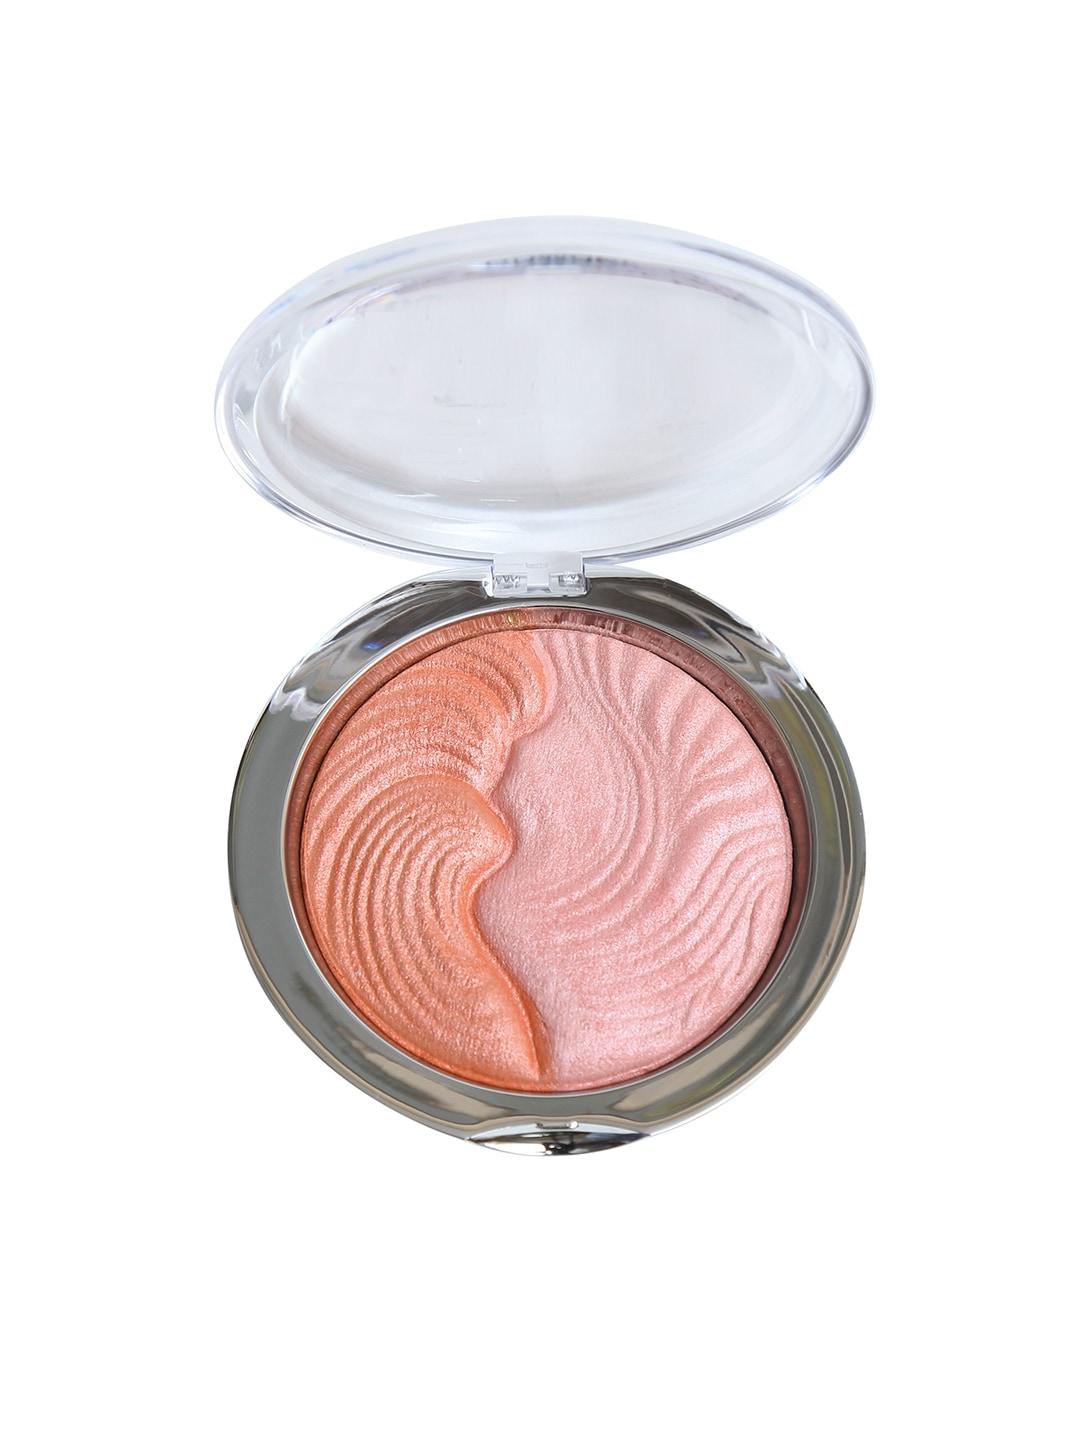 miss-claire-02-baked-powder-duo-7-g